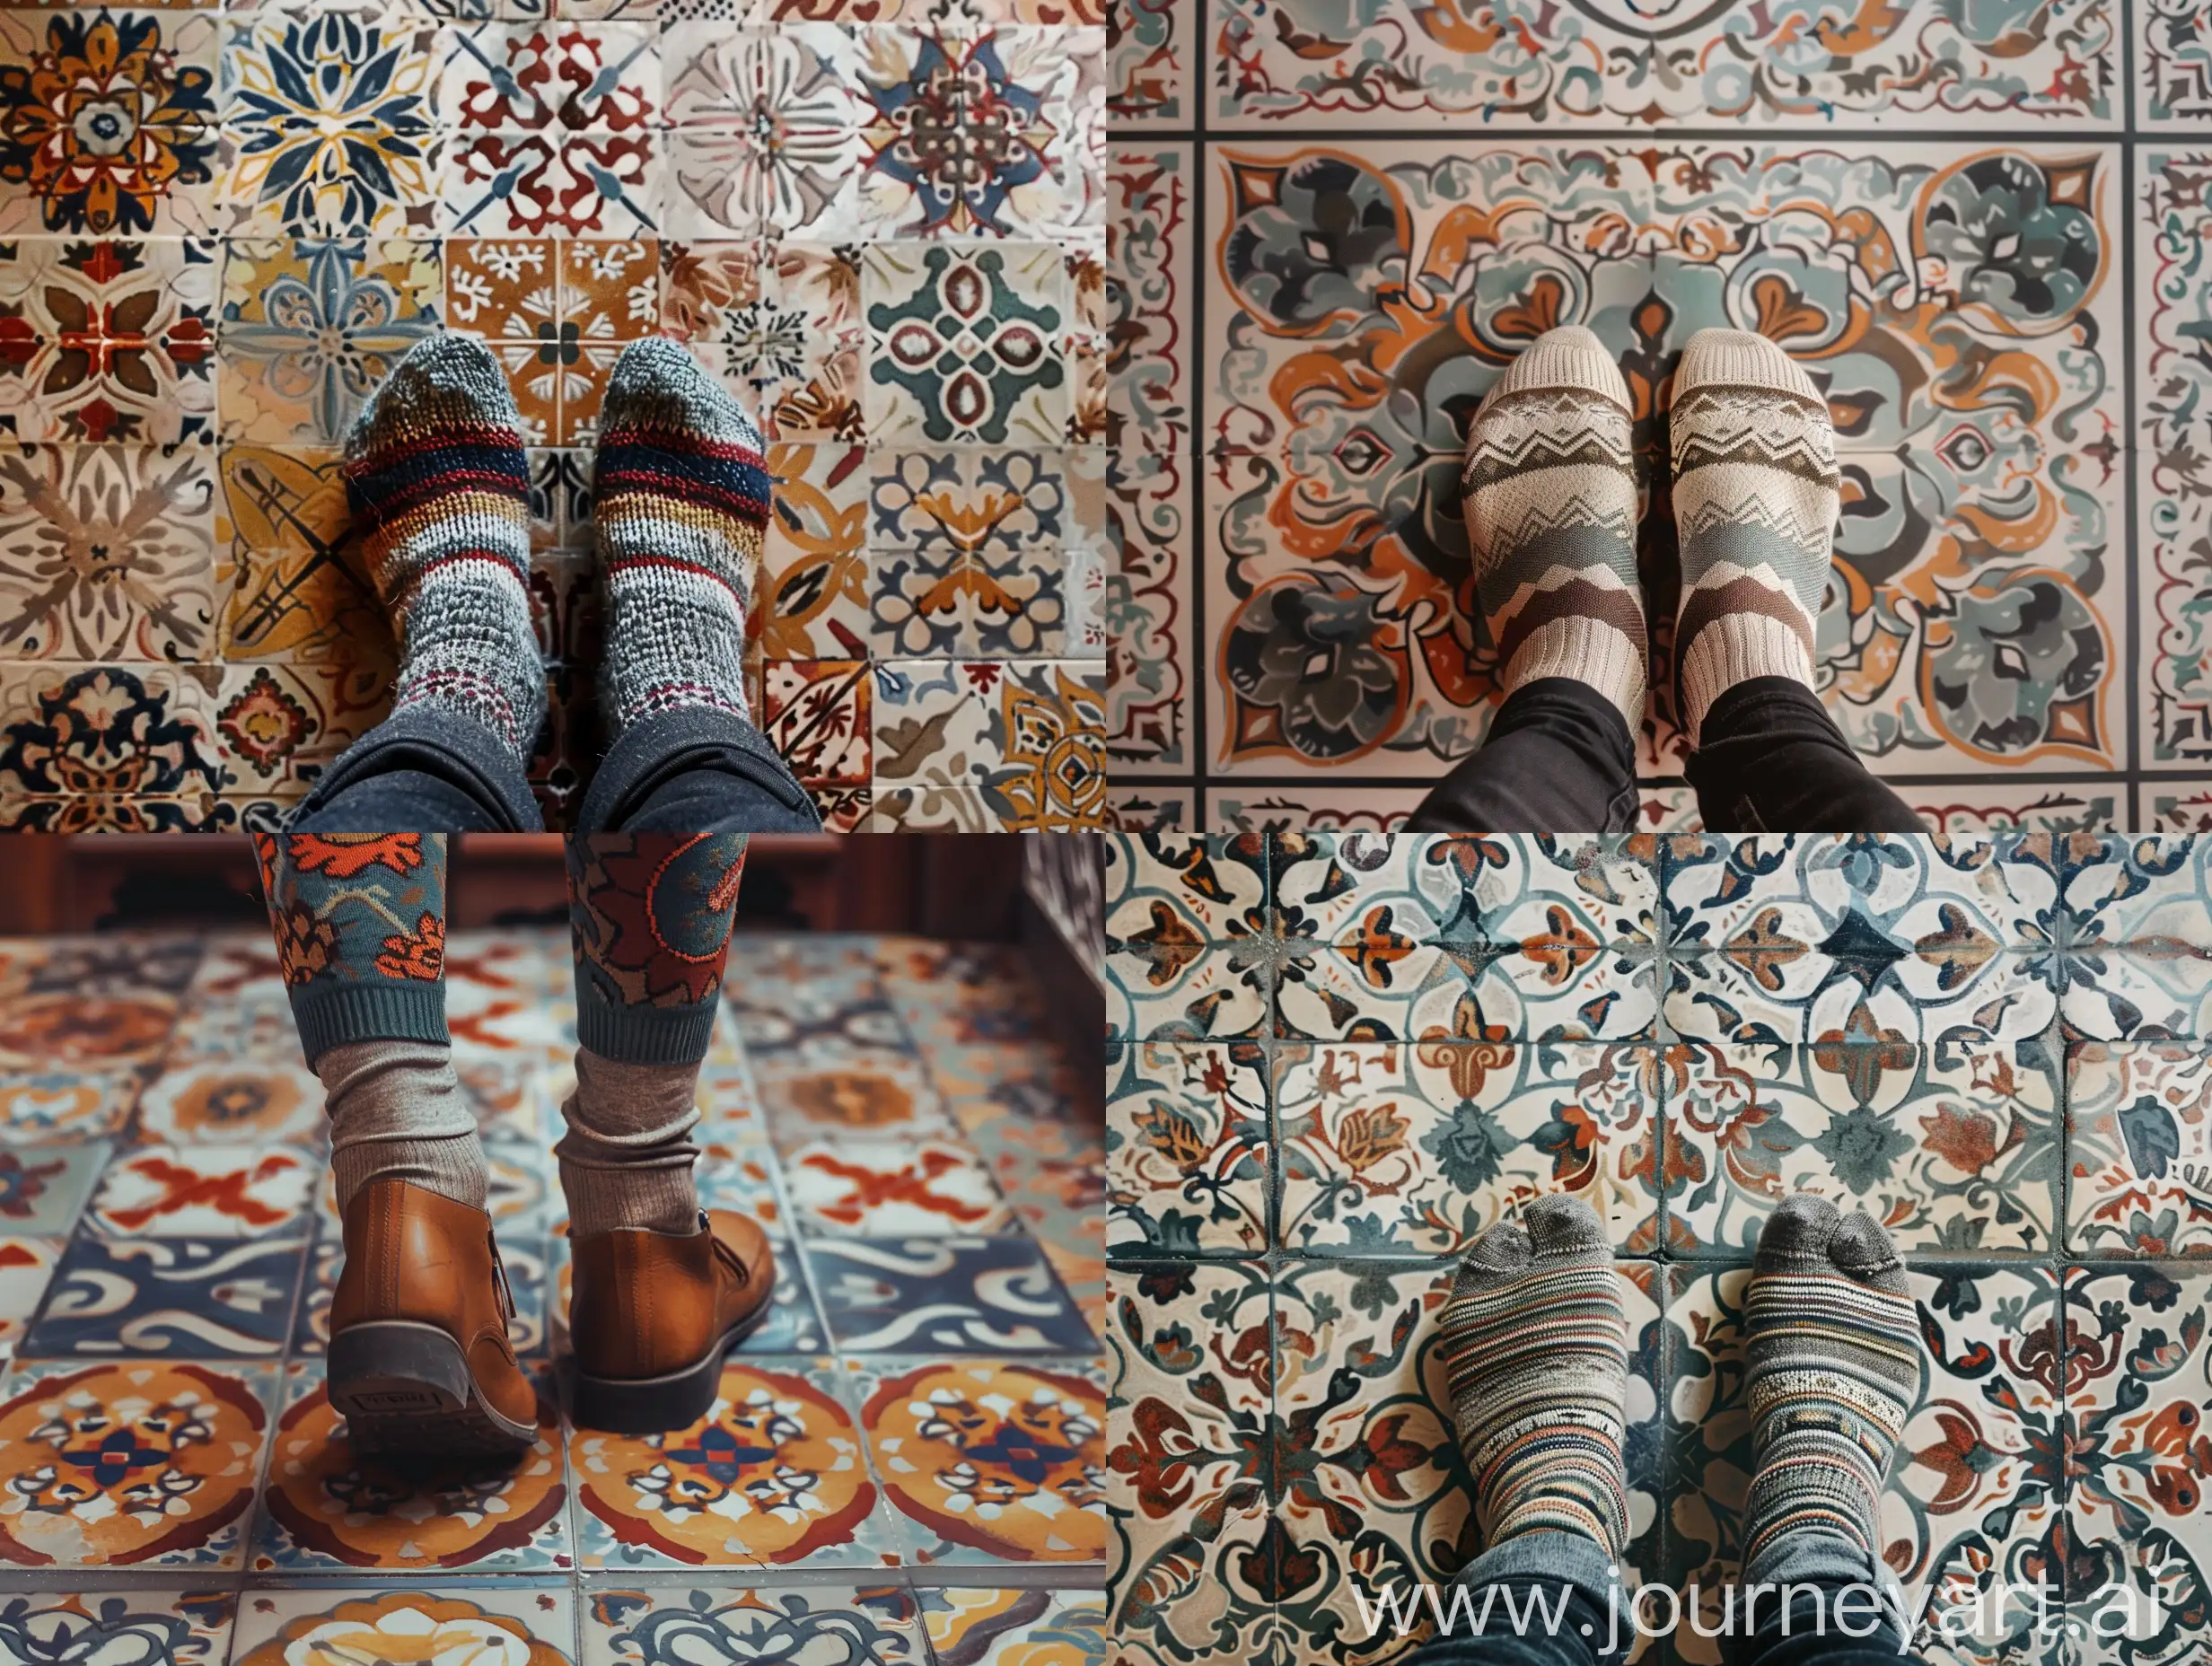 A photo of your feet walking on a patterned floor, with only socks visible.